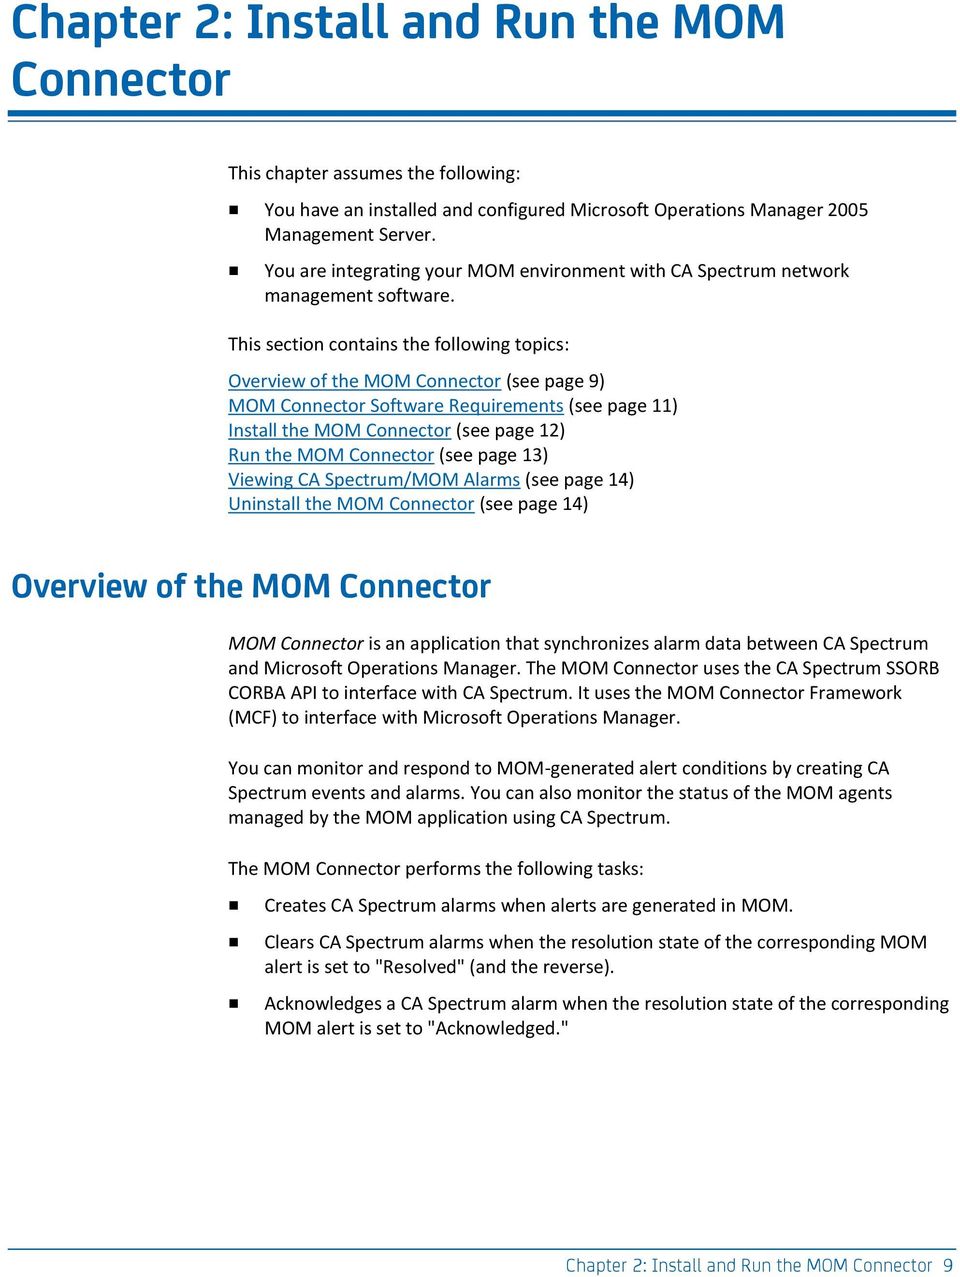 This section contains the following topics: Overview of the MOM Connector (see page 9) MOM Connector Software Requirements (see page 11) Install the MOM Connector (see page 12) Run the MOM Connector